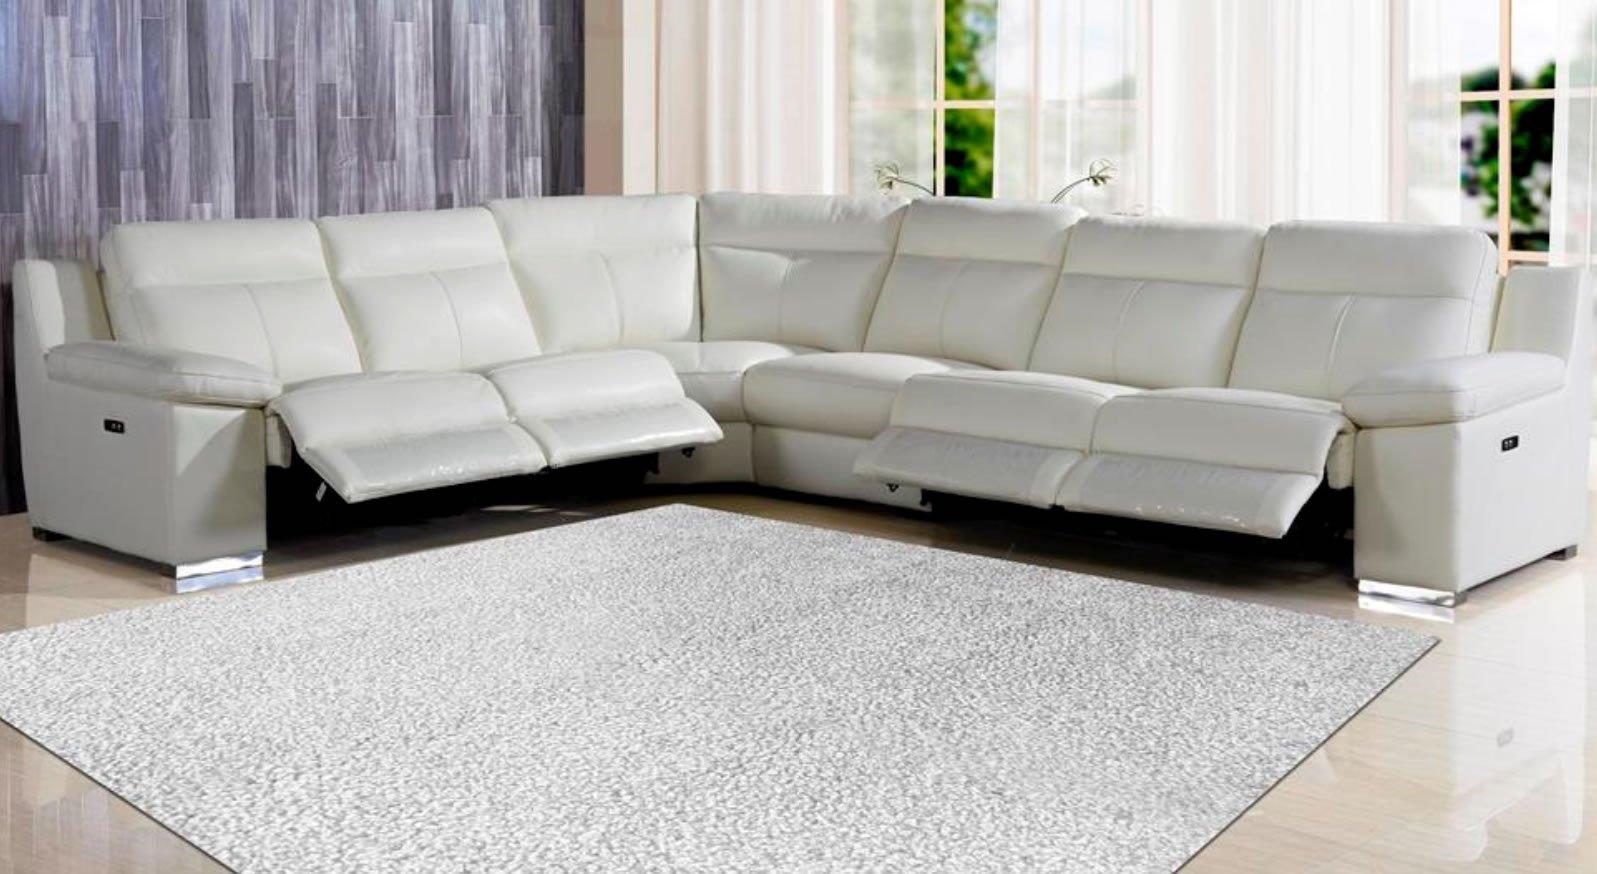 Contemporary Reclining Sectional UR9583 WHITE UR9583 WHITE in White Top grain leather